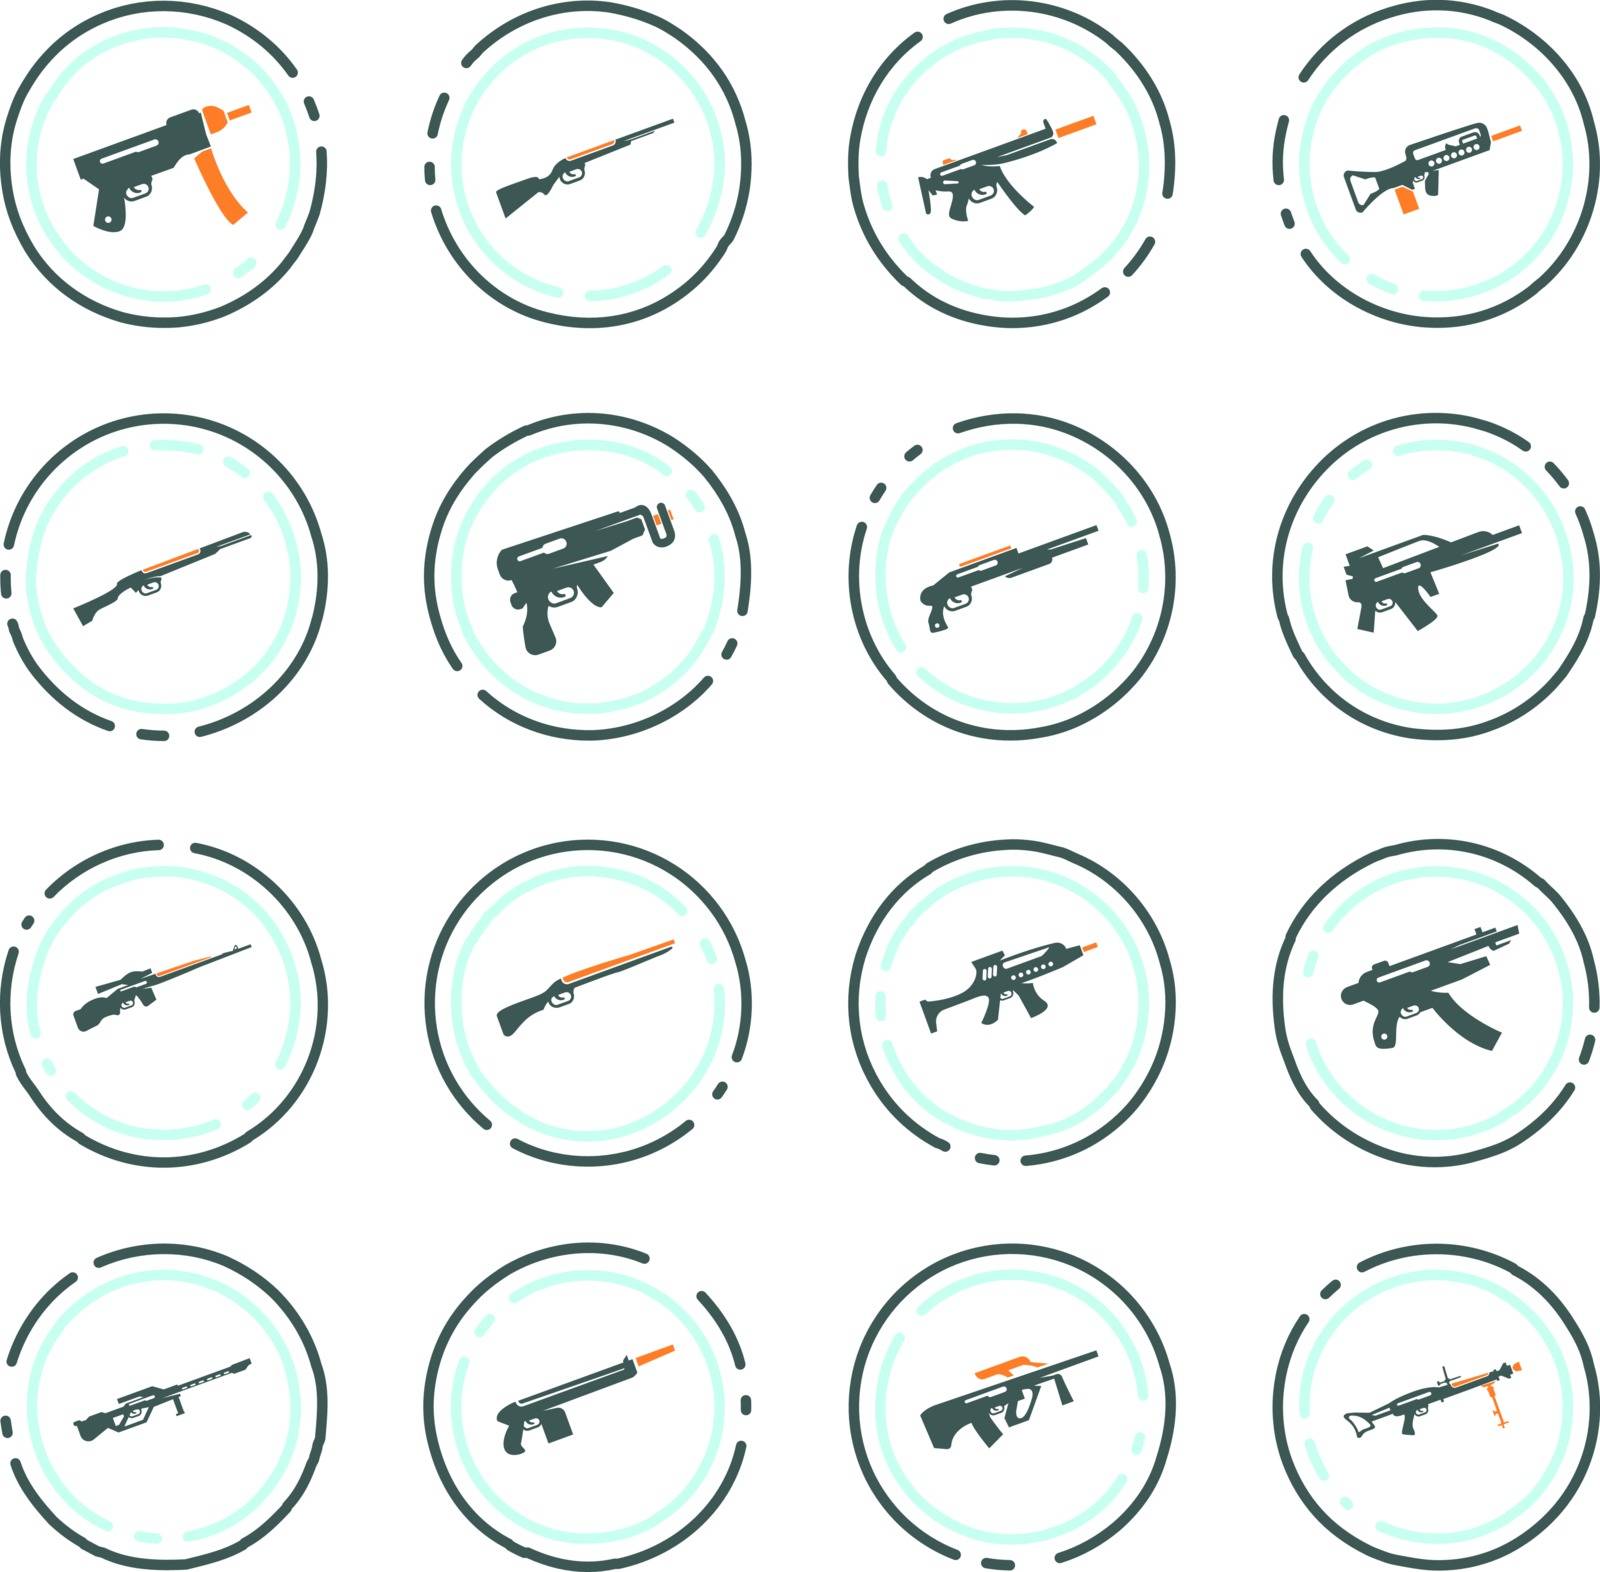 Hand weapons icon set for web sites and user interface